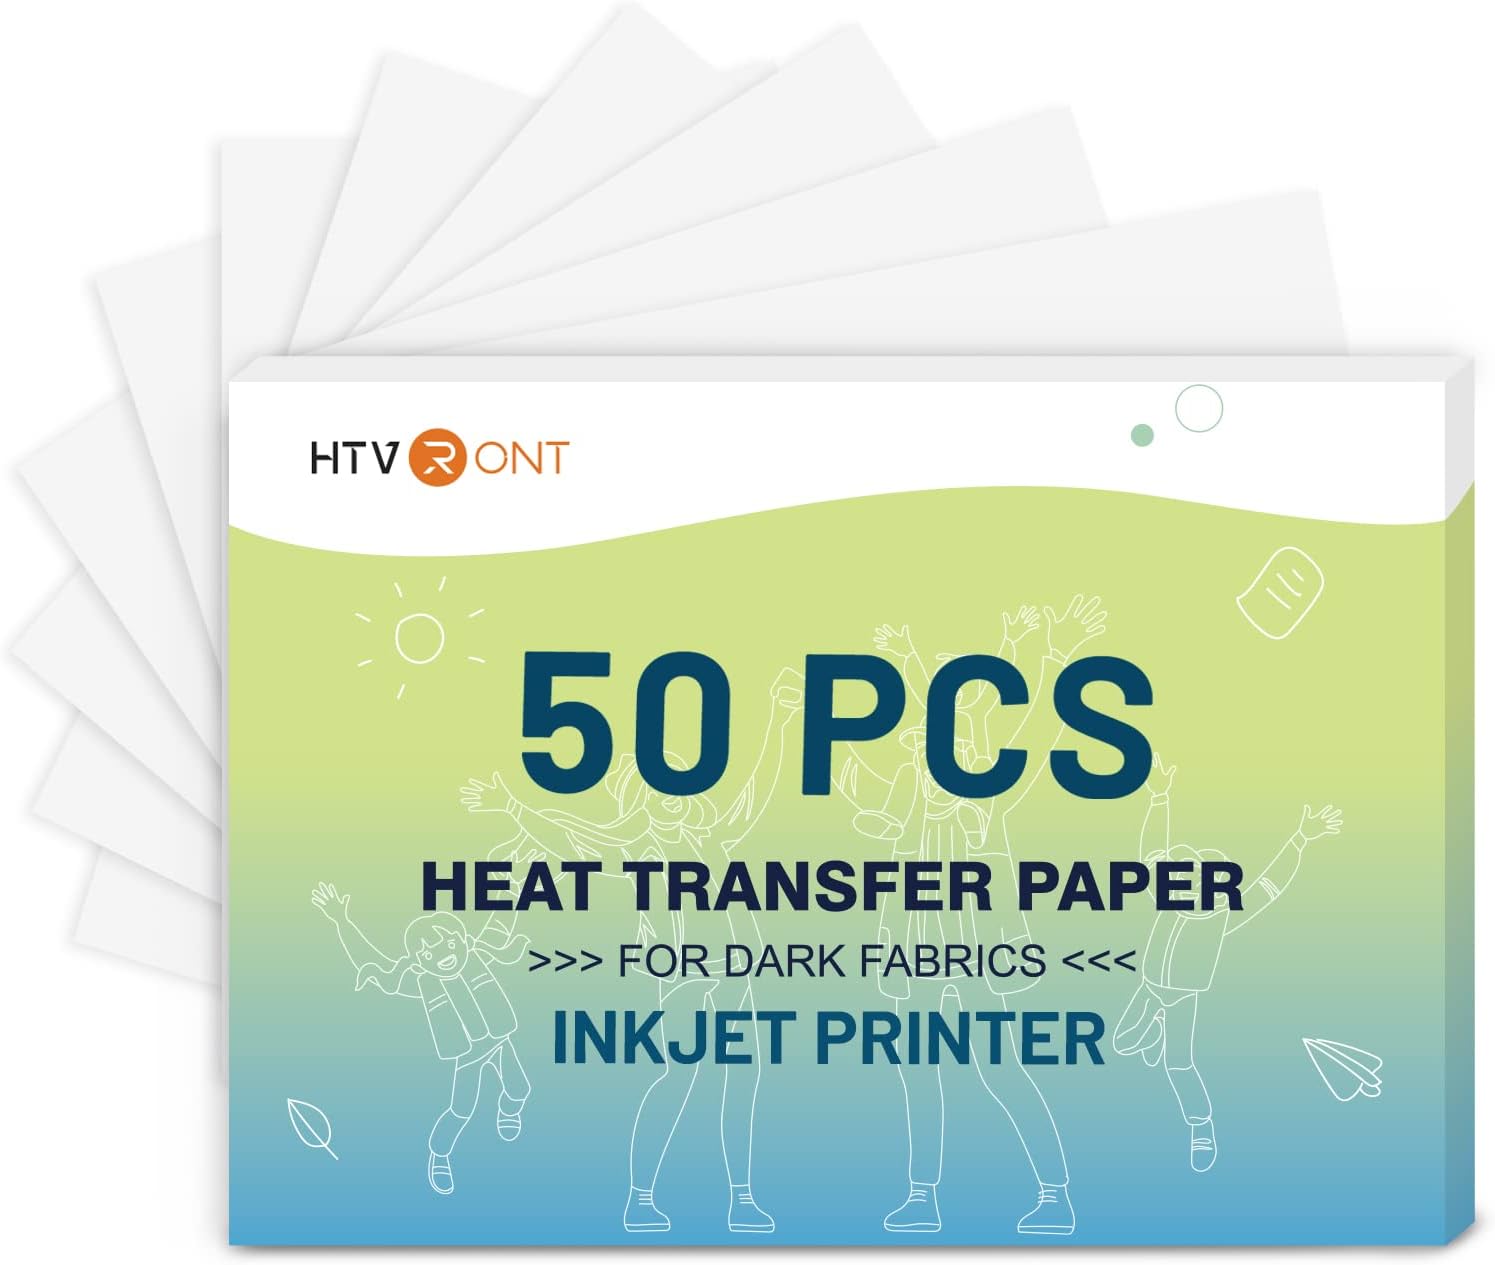 HTVRONT Heat Transfer Paper for Dark T Shirts -50 Pack [...]